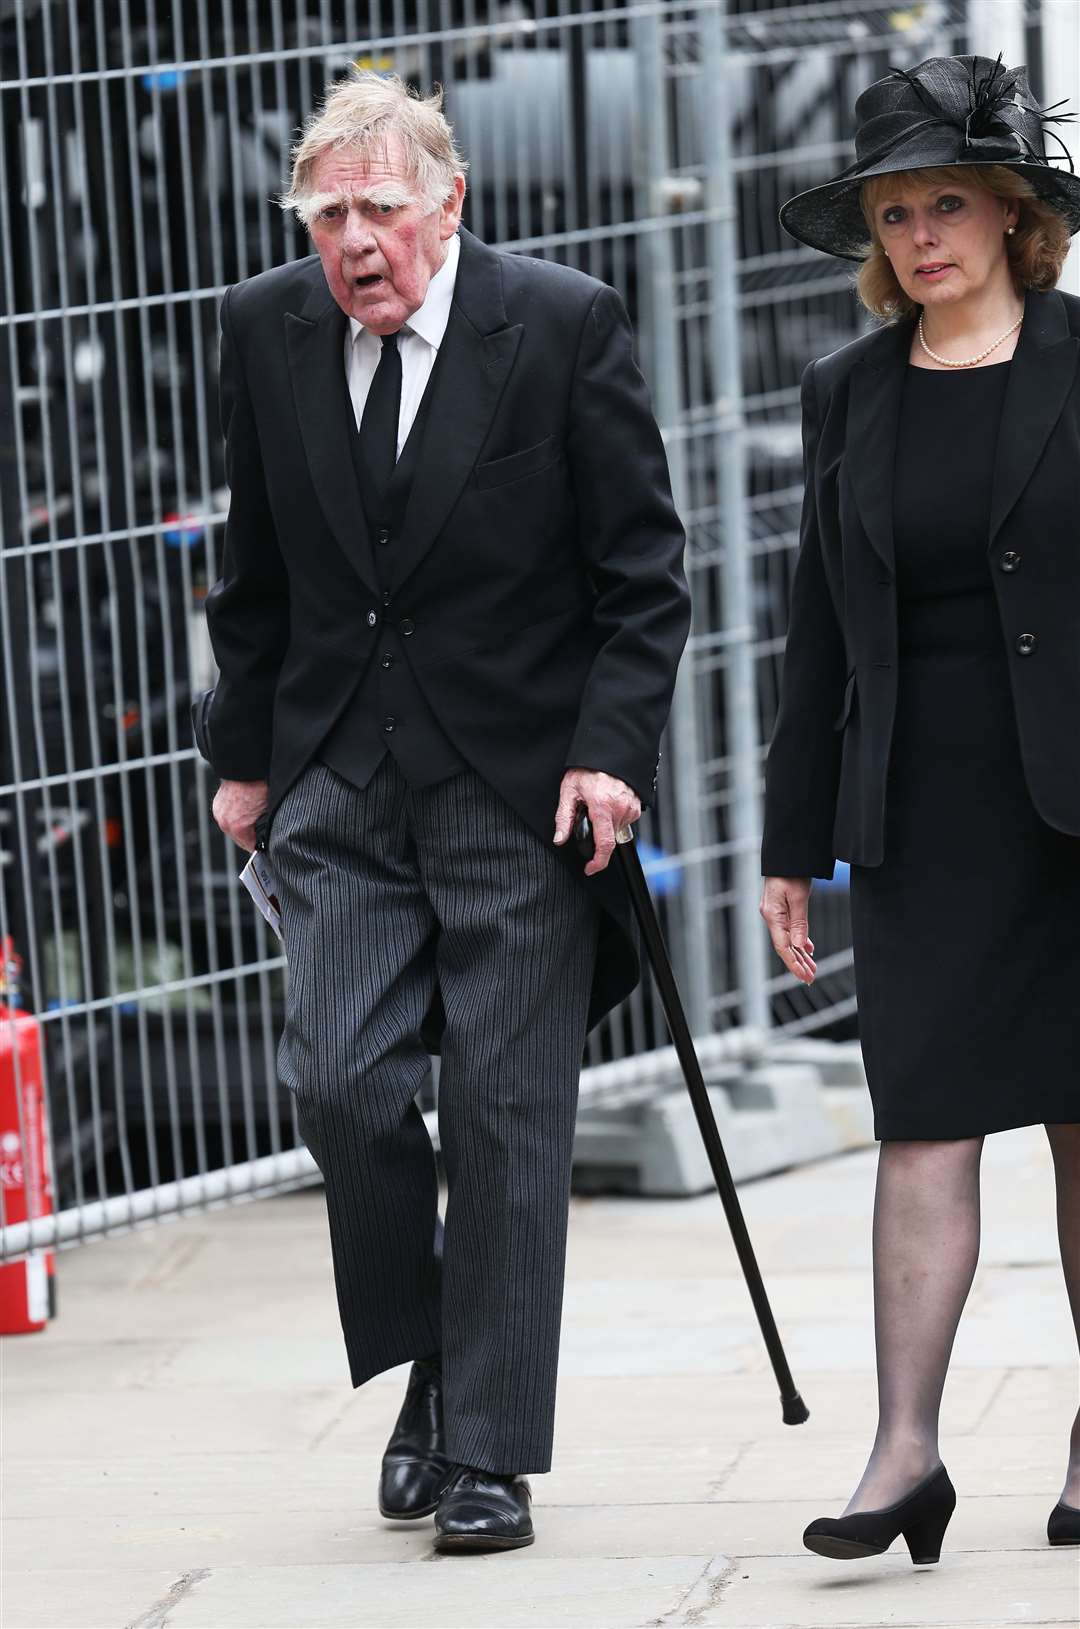 Bernard Ingham attends the ceremonial funeral of former prime minister Baroness Thatcher at St Paul’s Cathedral (Chris Jackson/PA)